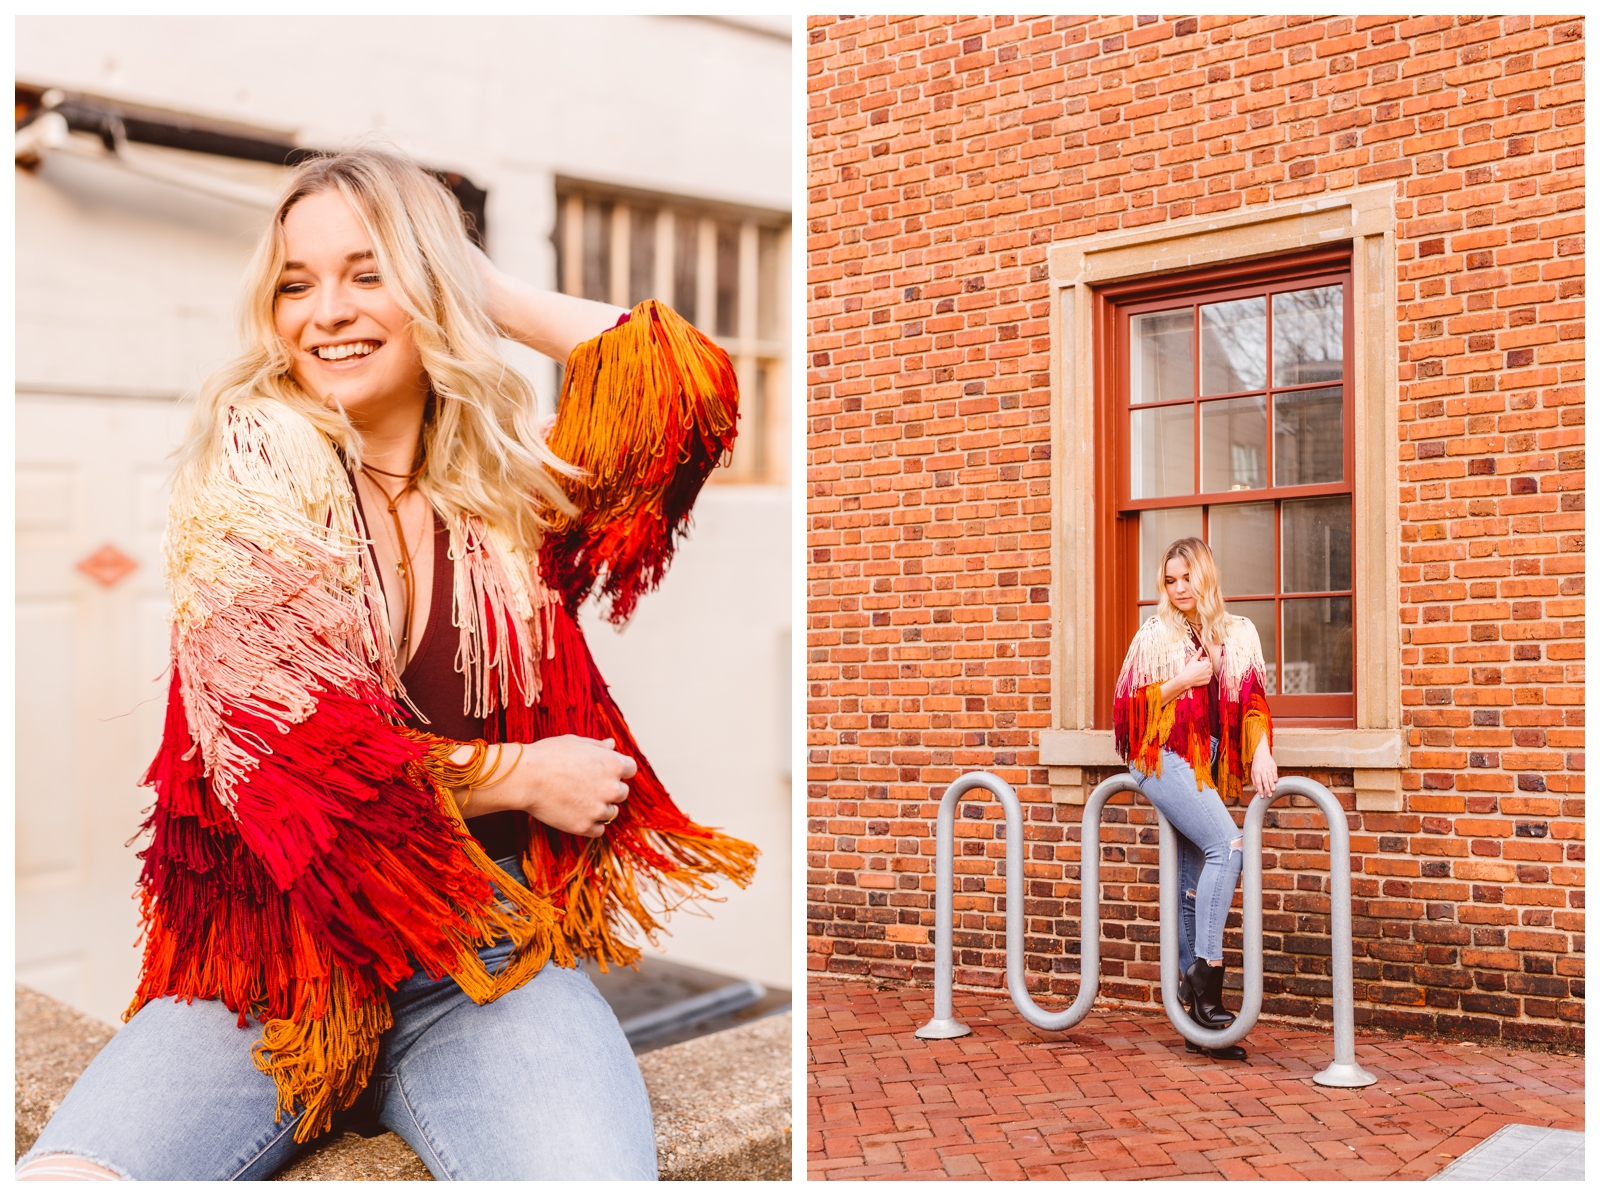 Quirky and Colorful Senior Portrait Session Inspiration - Downtown Annapolis, Maryland - Brooke Michelle Photography